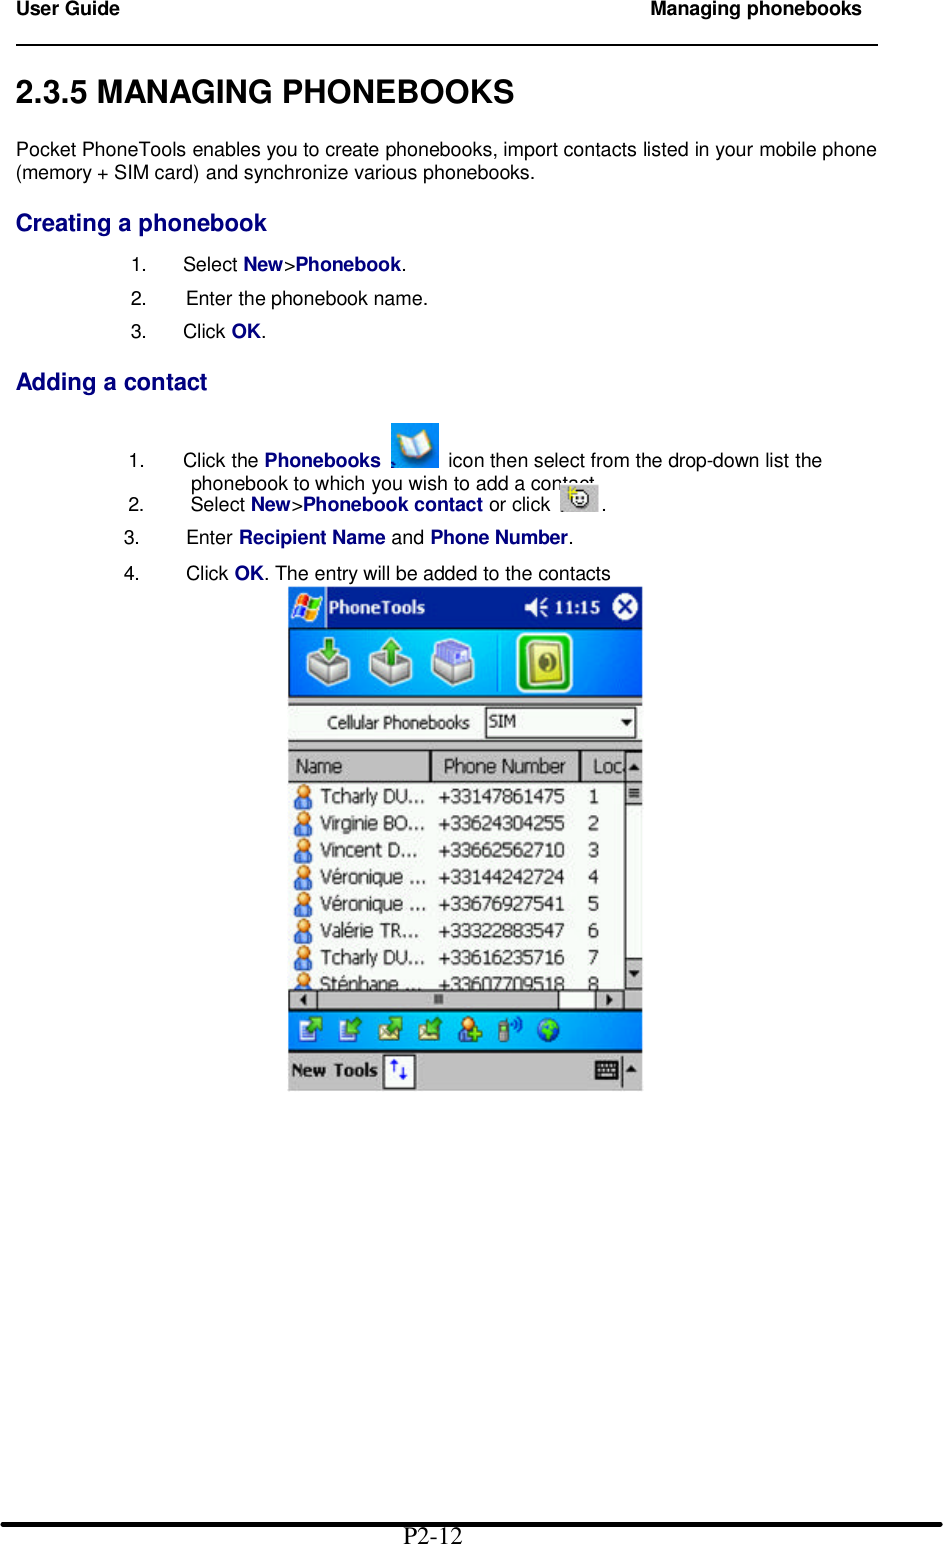 User Guide Managing phonebooks                                                                        2.3.5 MANAGING PHONEBOOKS  Pocket PhoneTools enables you to create phonebooks, import contacts listed in your mobile phone (memory + SIM card) and synchronize various phonebooks.  Creating a phonebook  1.   Select New&gt;Phonebook.  2.   Enter the phonebook name.  3.   Click OK.  Adding a contact  1. Click the Phonebooks   icon then select from the drop-down list the            phonebook to which you wish to add a contact.          2.    Select New&gt;Phonebook contact or click .              3.    Enter Recipient Name and Phone Number.              4.    Click OK. The entry will be added to the contacts                                                P2-12 